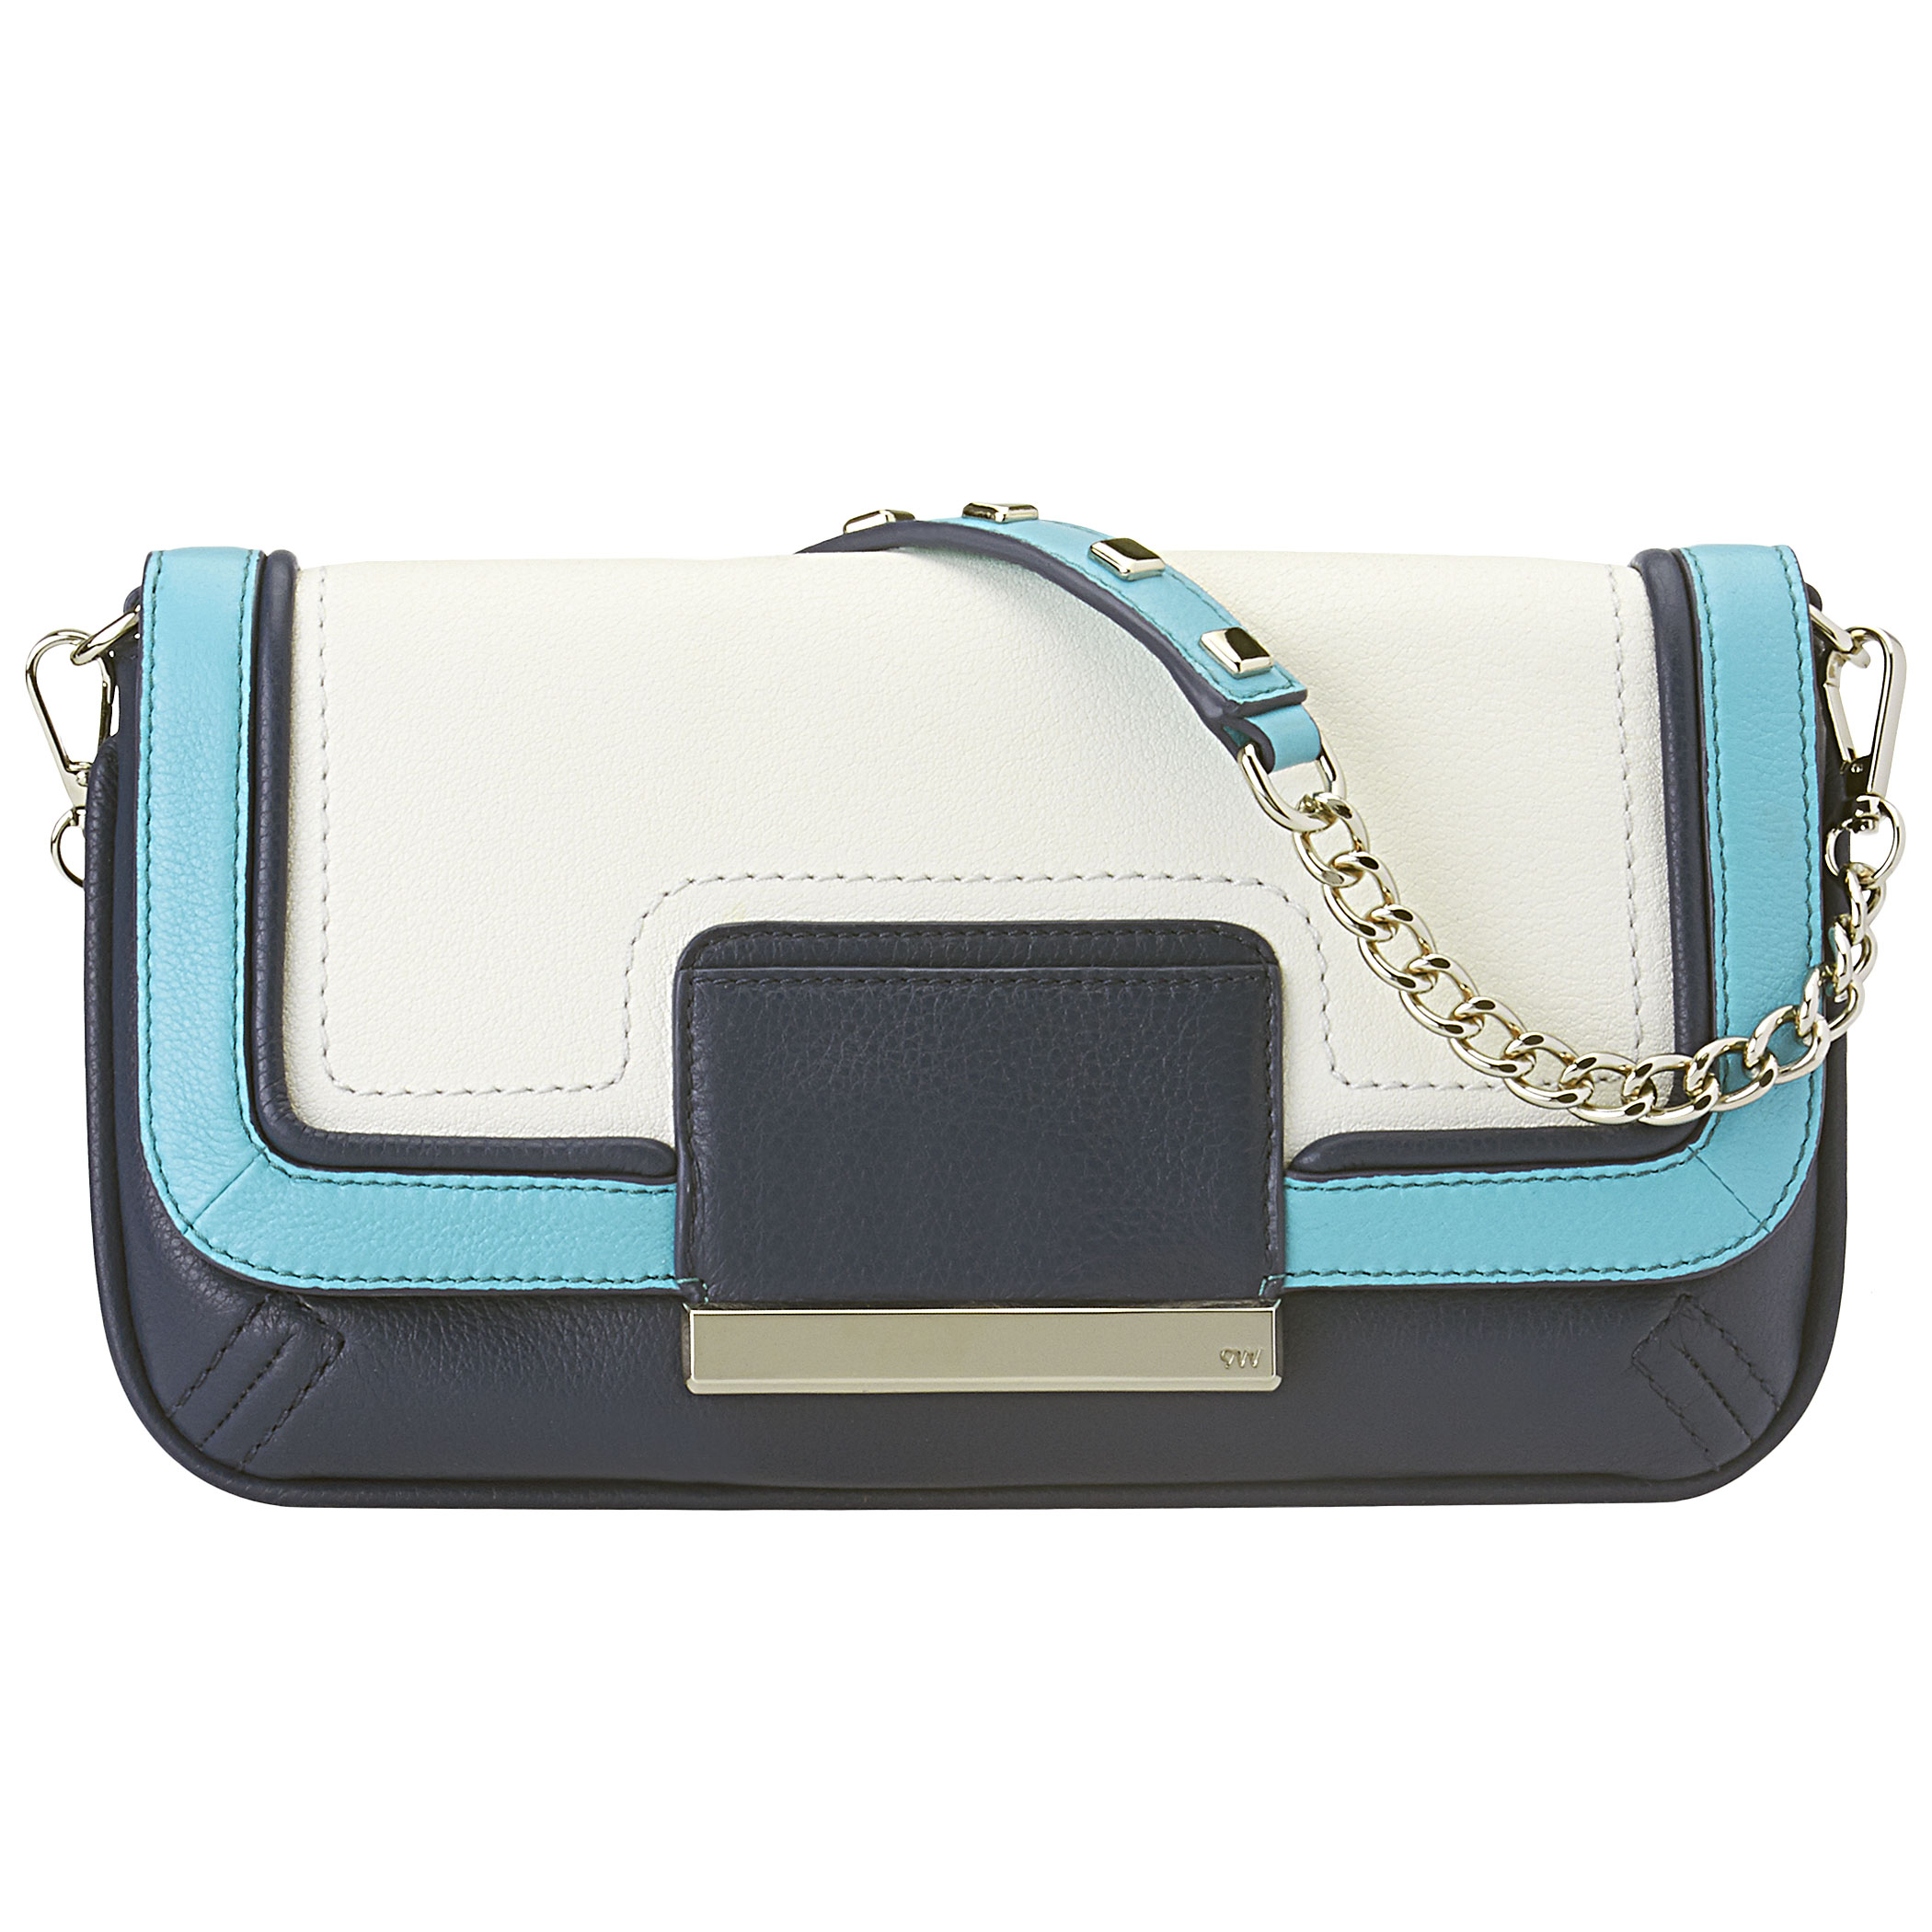 Lyst - Nine West Astor Colorblock Leather Clutch Bag in White